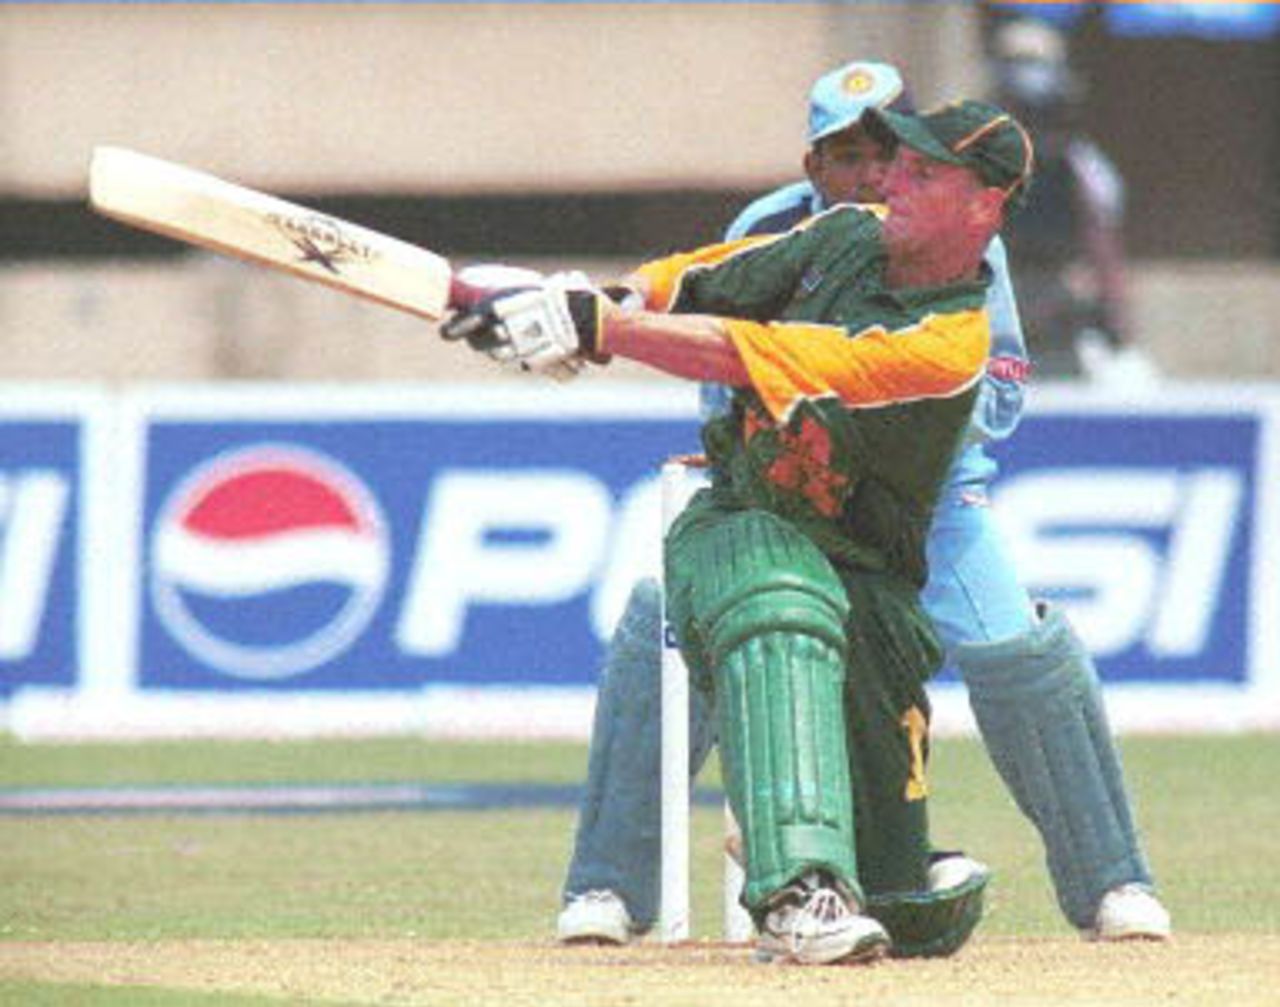 South African batsman Gary Kirsten sweeps a ball on his way to making 115 runs as Indian wicketkeeper Samir Dighe (partly covered) looks on during the first one-day international cricket match between India and South Africa in Cochin 09 March 2000. Despite centuries from both openers Kirsten and Herschelle Gibbs India went onto win the match by 3 wickets